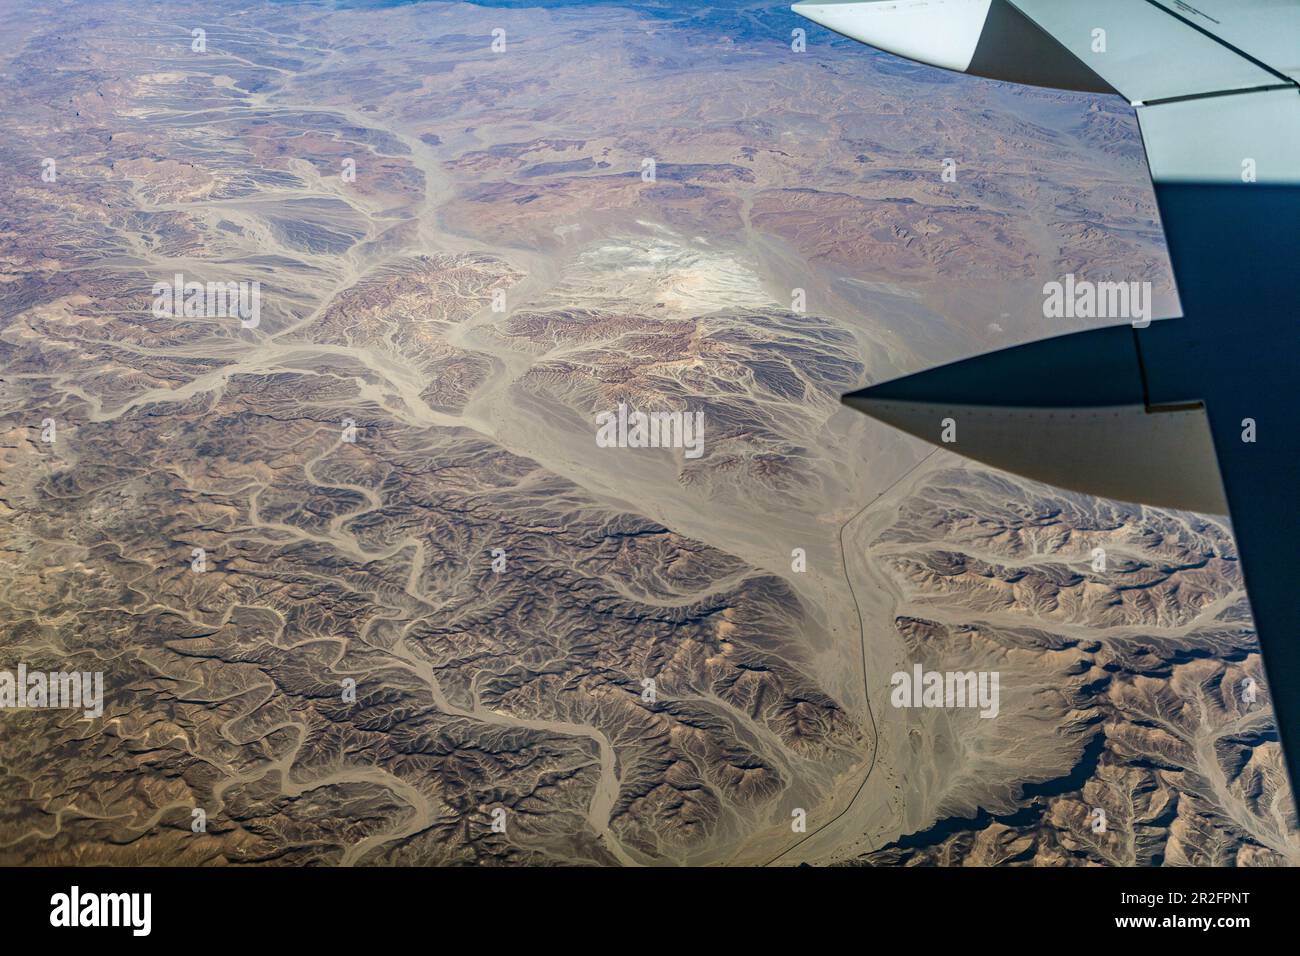 Aerial view of dried-up rivers in the Arabian Desert, Egypt Stock Photo